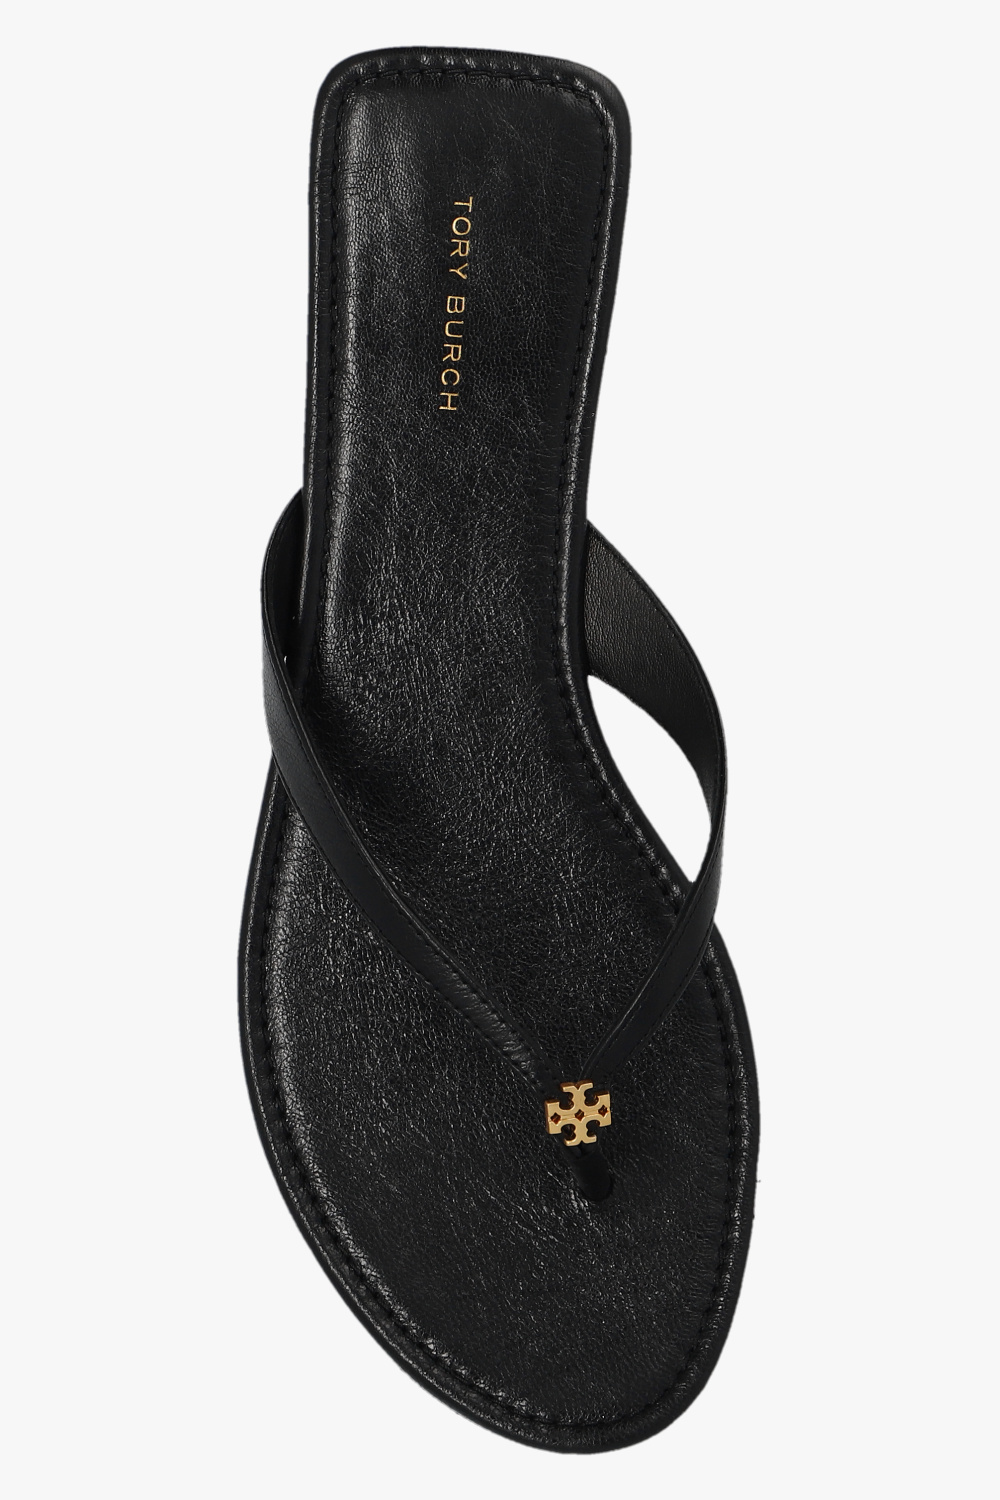 Tory Burch Leather Womens